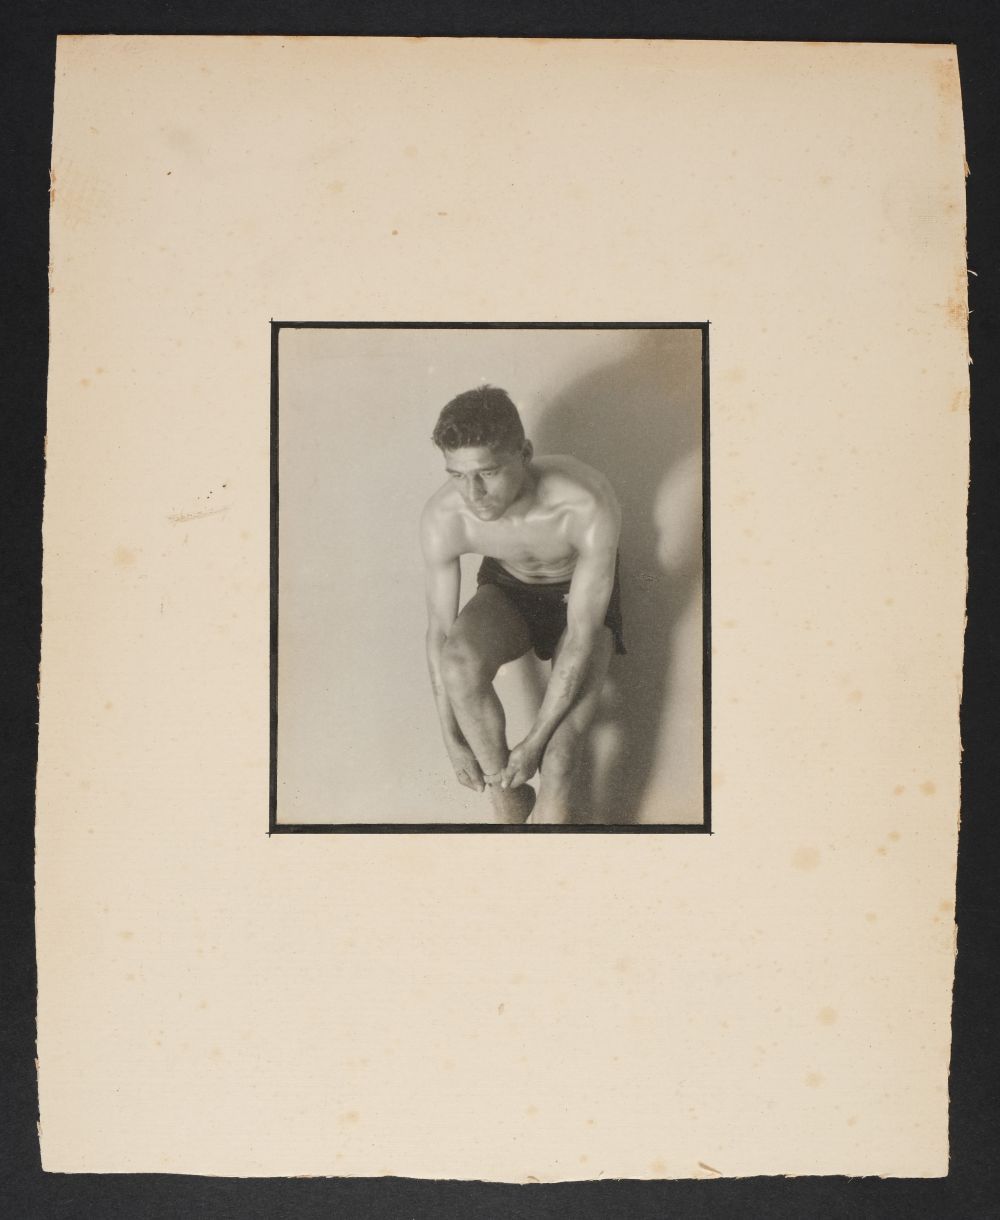 * Glover (Montague Charles, 1898-1983). A group of 7 studies of a male model in studio, c. 1930-35 - Image 7 of 10